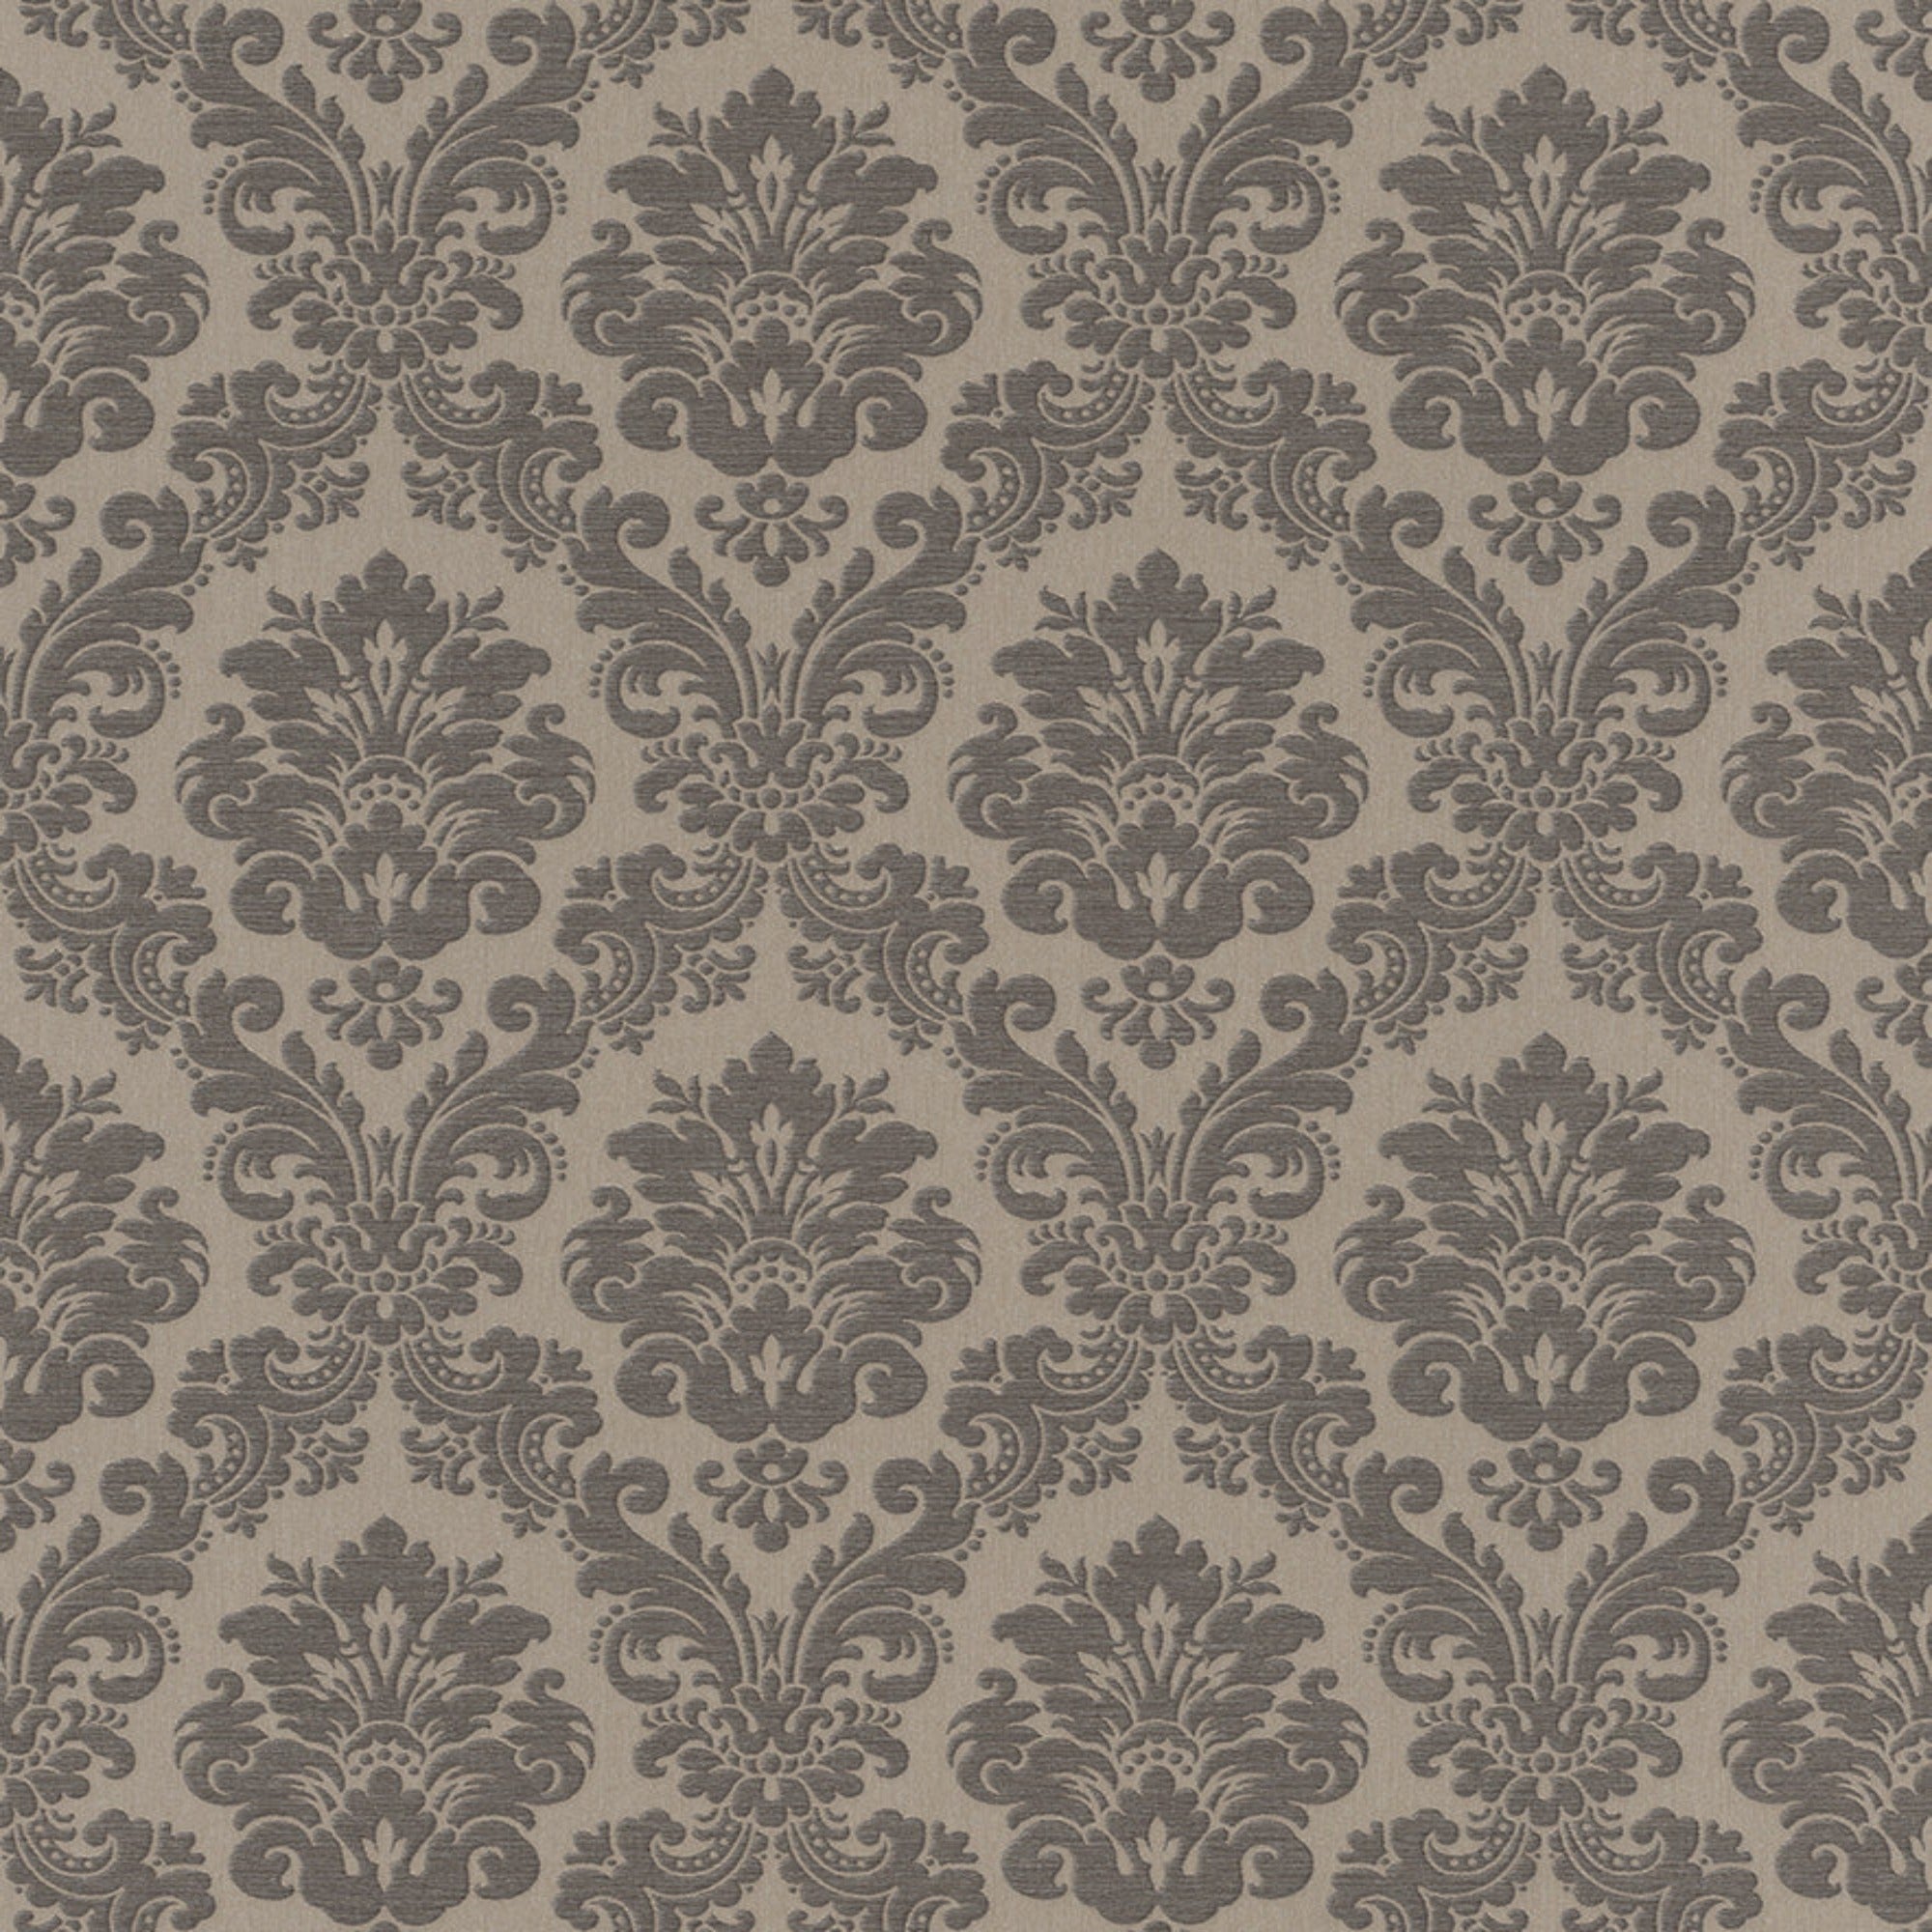 Trianon Damask Brown / Charcoal | WonderWall by Nobletts